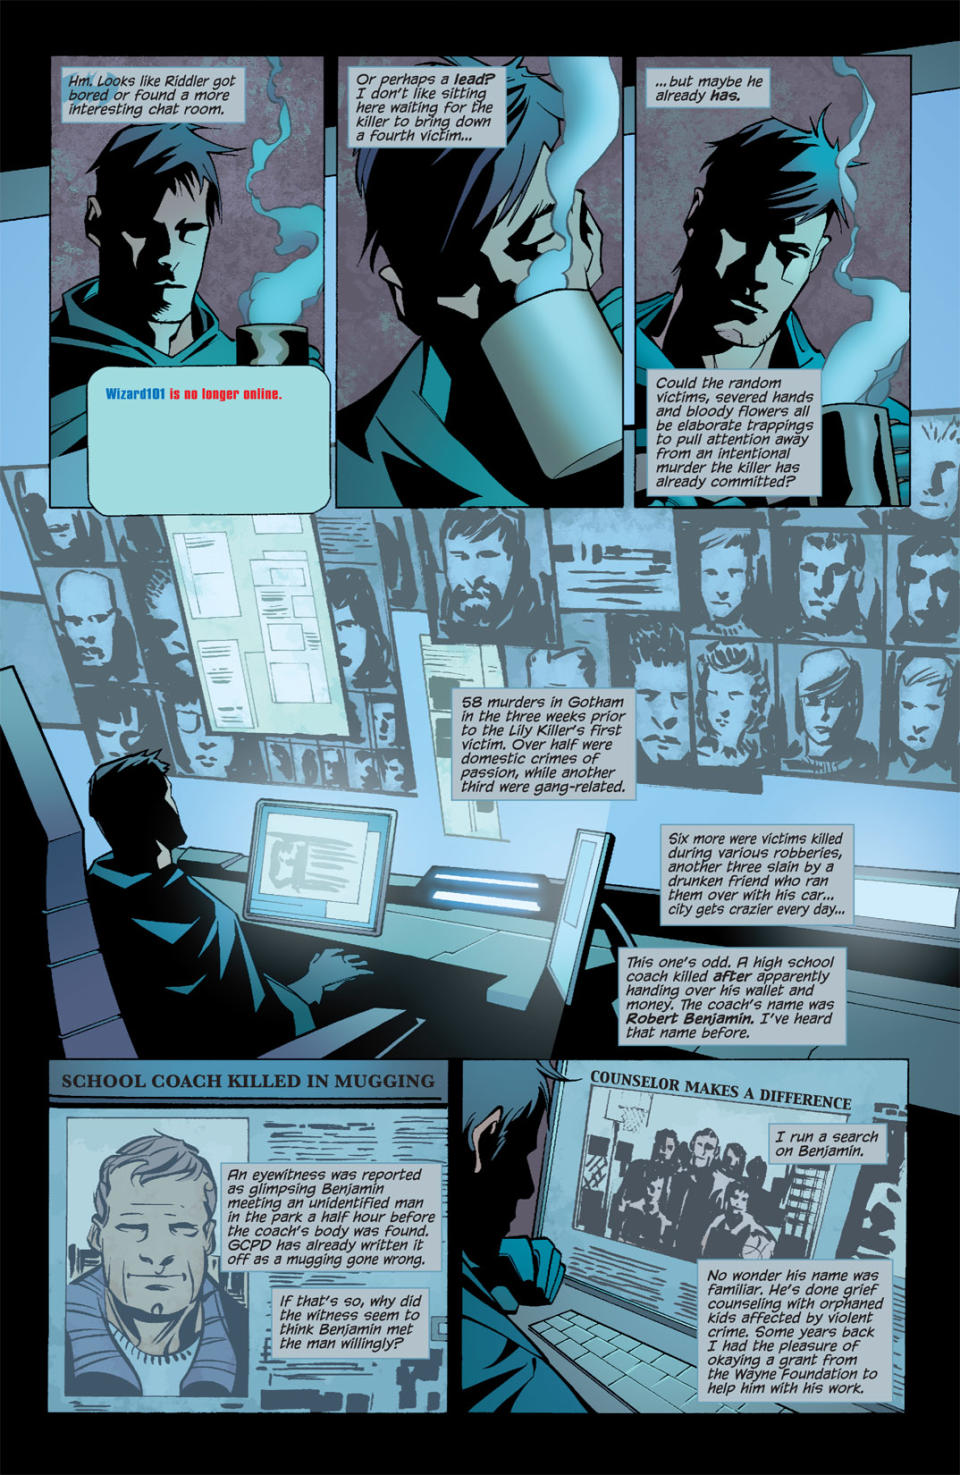 A page from Detective Comics shows batman using a chatroom